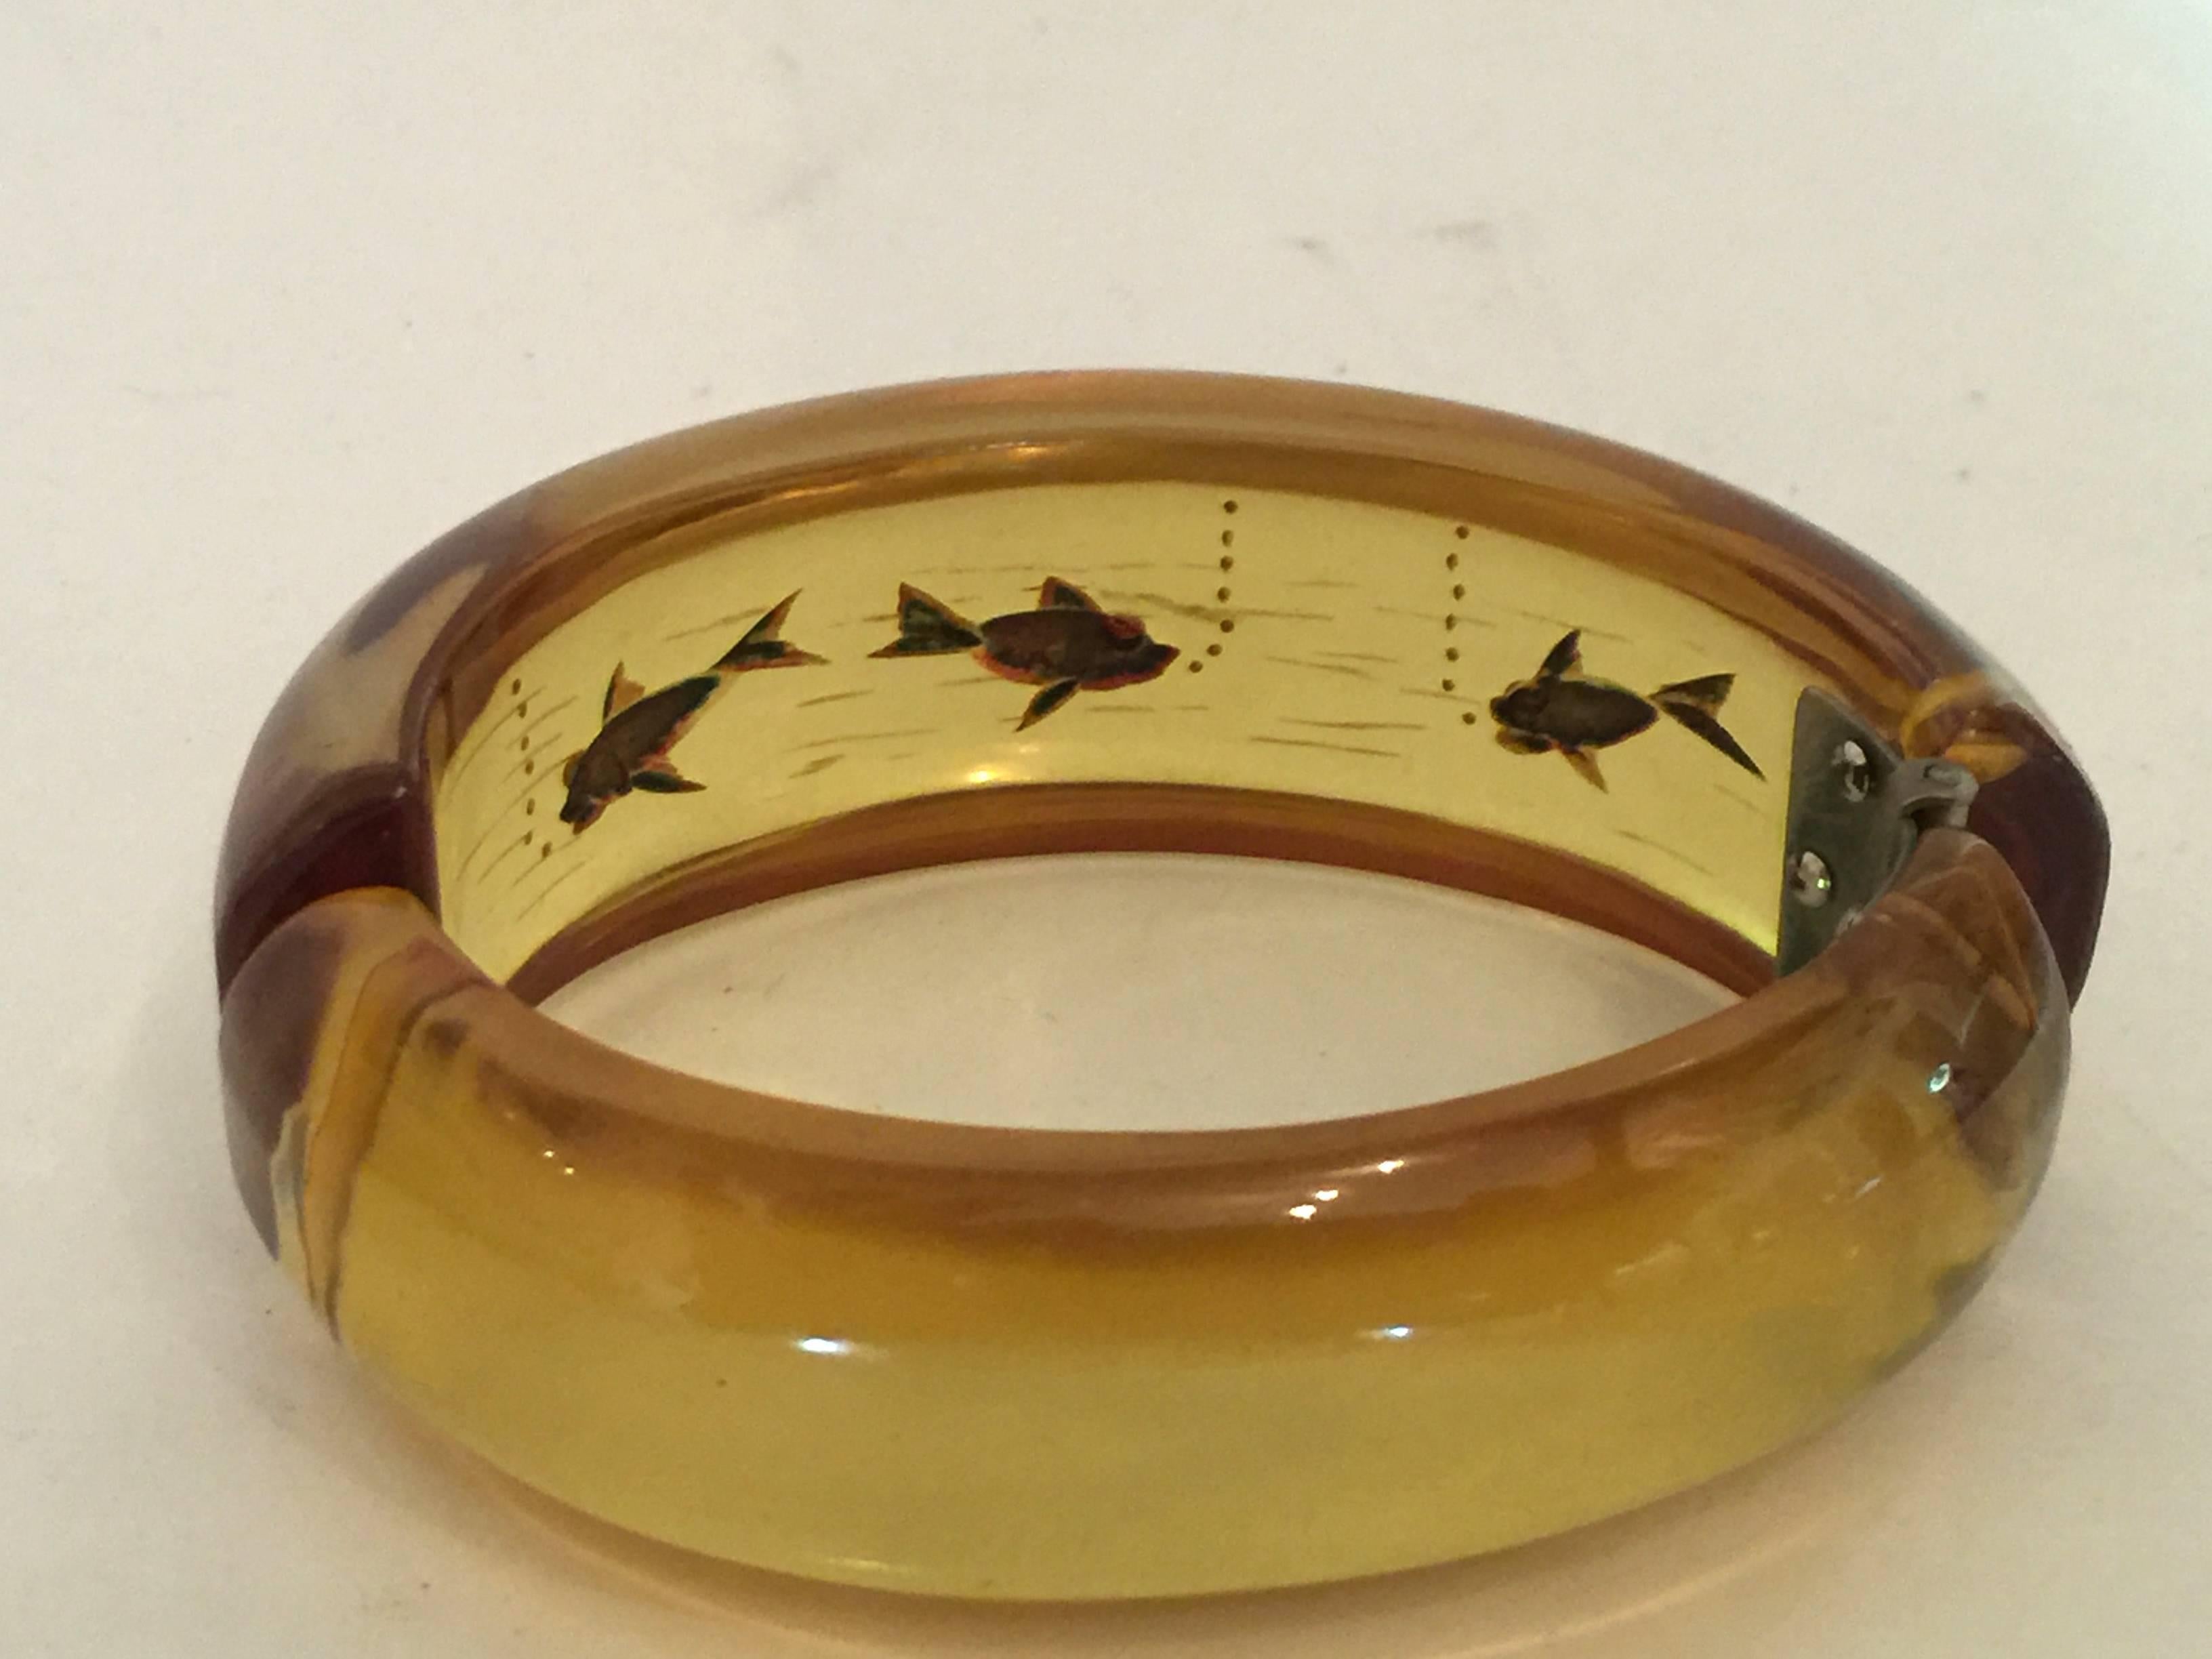 Most usually seen as bangle bracelets, rather than the more wearable hinged bracelet variety, all reverse carved fish hinged bracelets in bakelite are rare...but this one is super rare....Bubbles, waves, incredibly frozen in 'apple juice' fish are